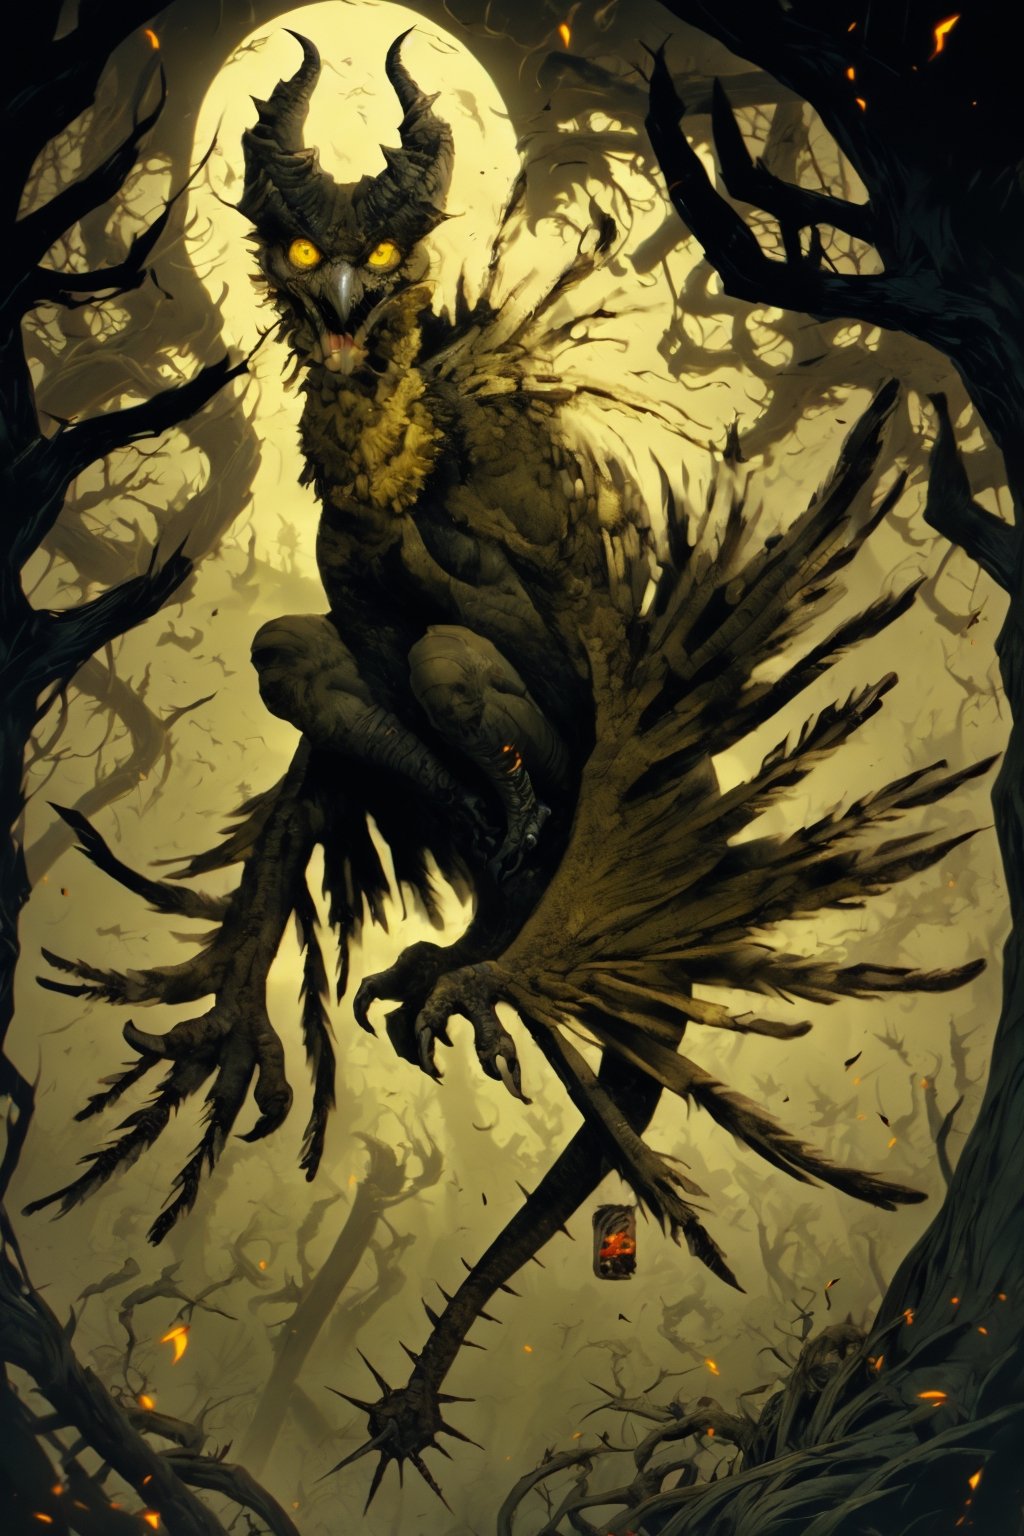 Owl demon, owl, monster, open mouth, toothy maw, toothed beak, devil, final boss, detailed teeth, claws, detailed eyes, demon lord, lord of darkness, yellow eyes, sitting on dead tree.